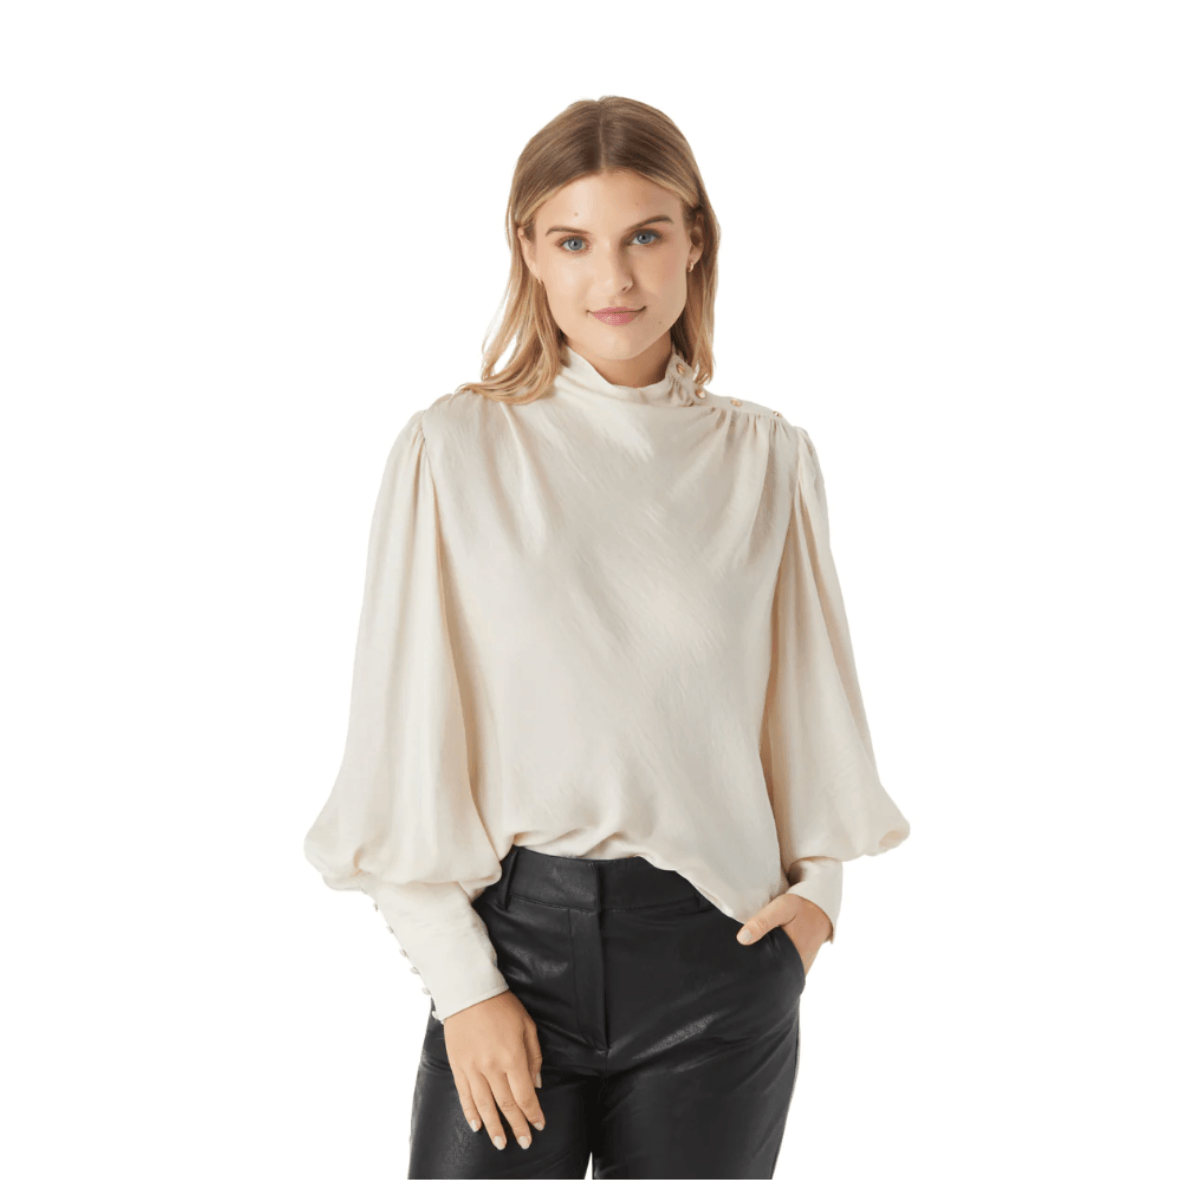 Florence Blouse - Fairley Fancy 